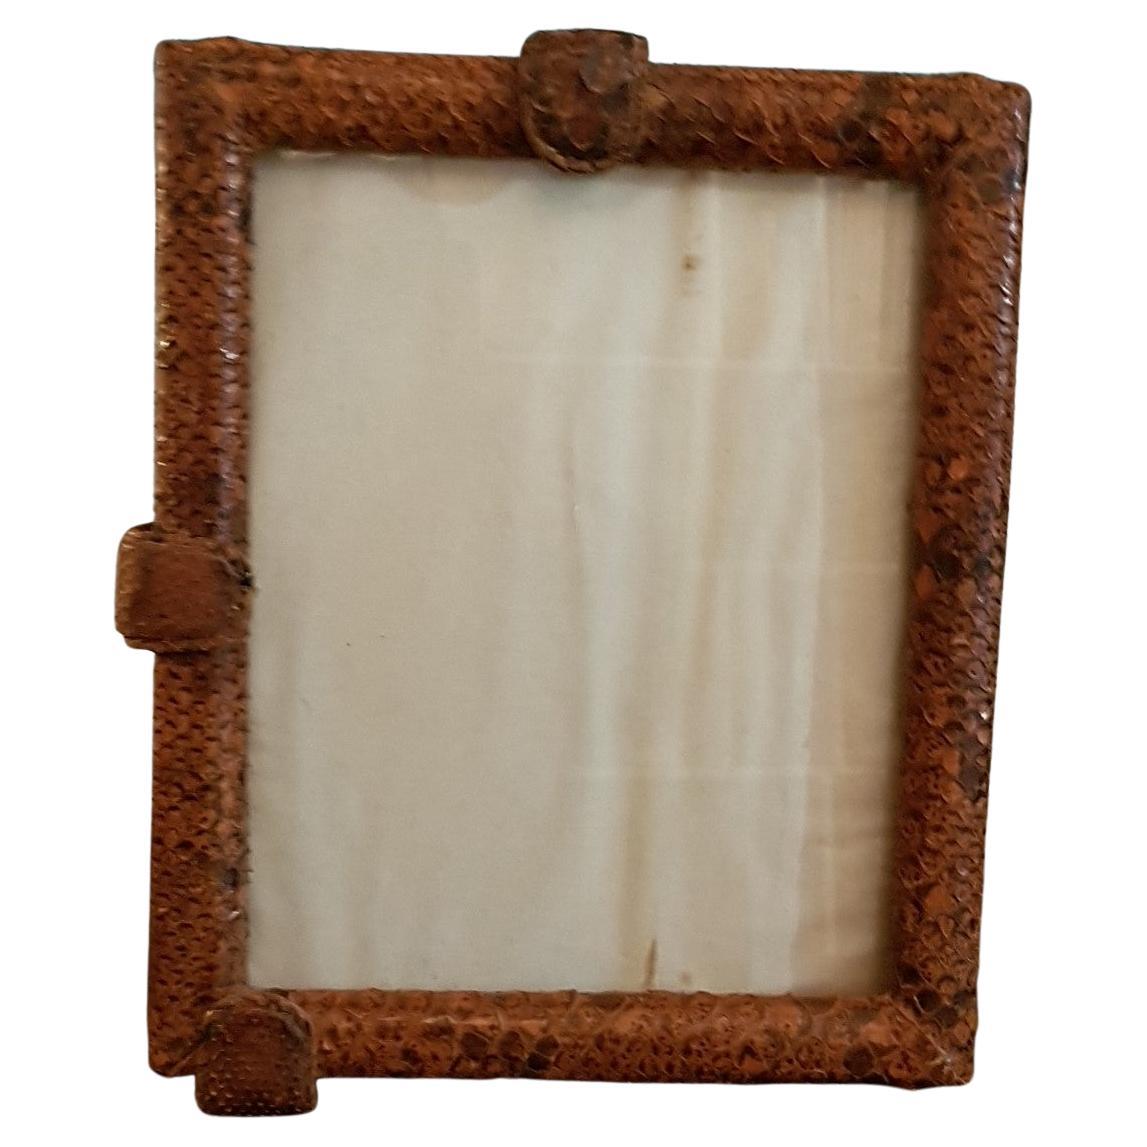 Fine quality and rare snakeskin picture frame with glass and leather stand at the back. The snakeskin clad side clips move to enable you to place the picture in the frame. The snakeskin is aged and has an amazing tactile quality to it, rarely found